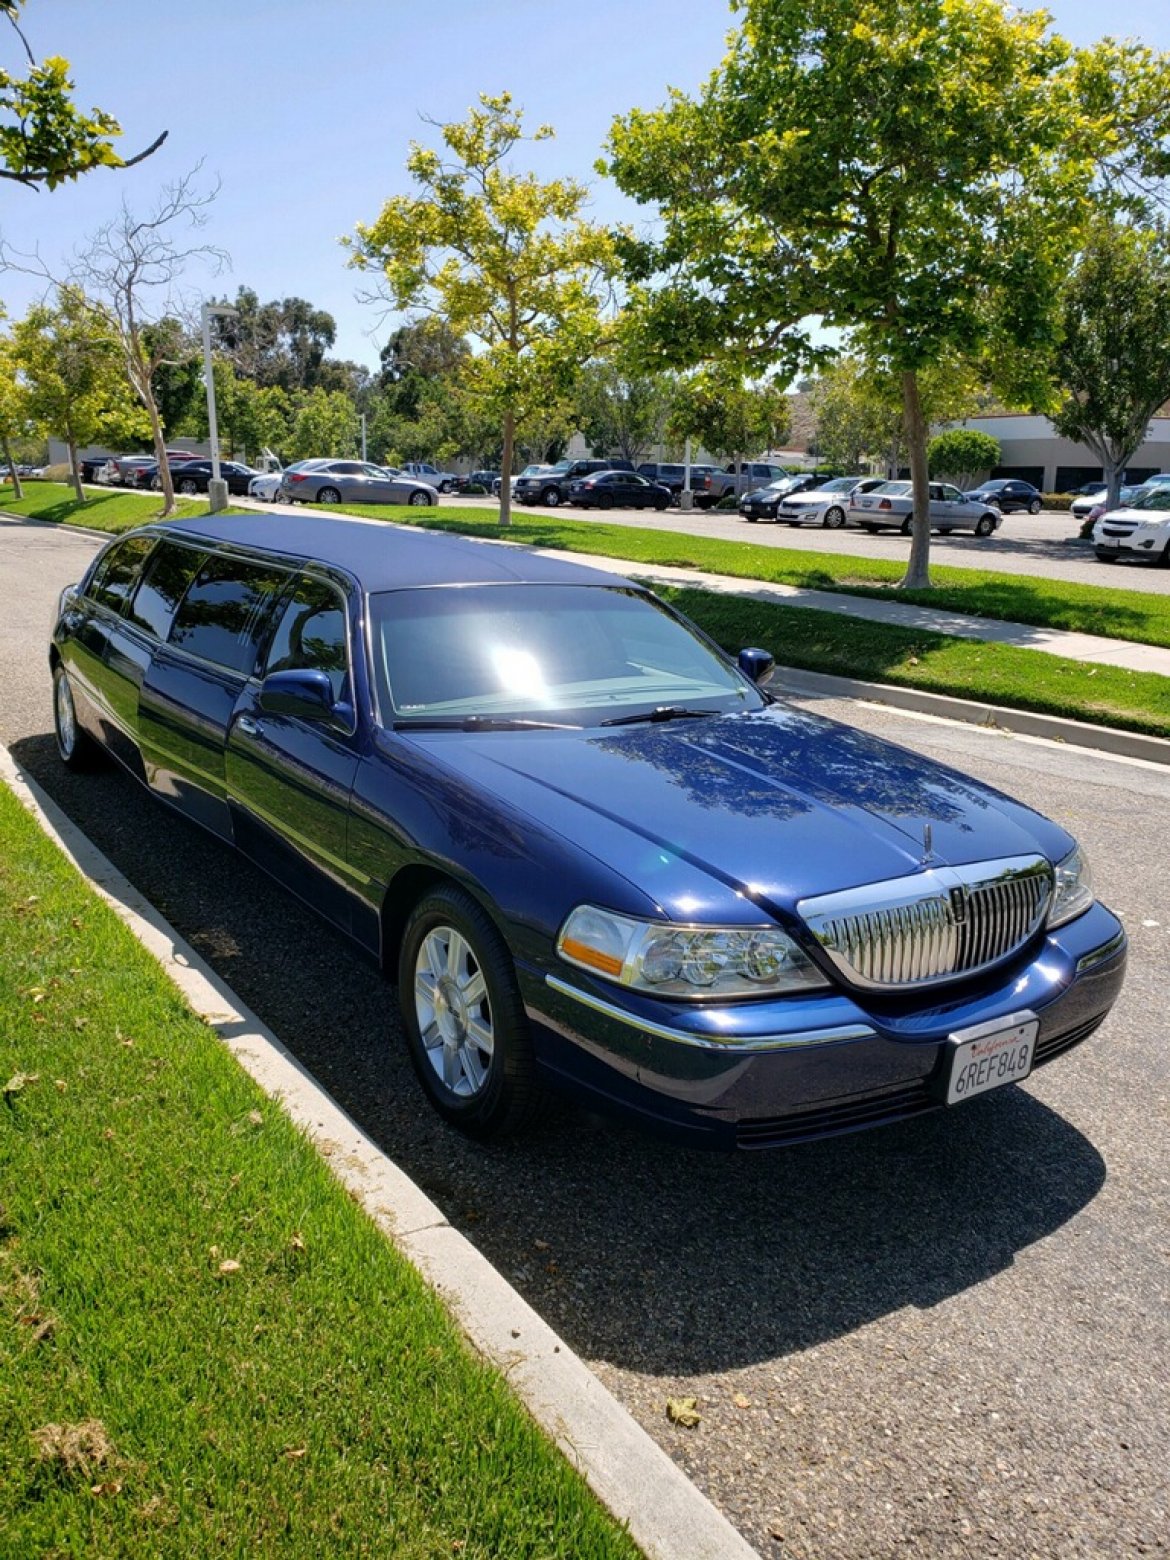 Limousine for sale: 2012 Lincoln Continental by Quality Coachworks